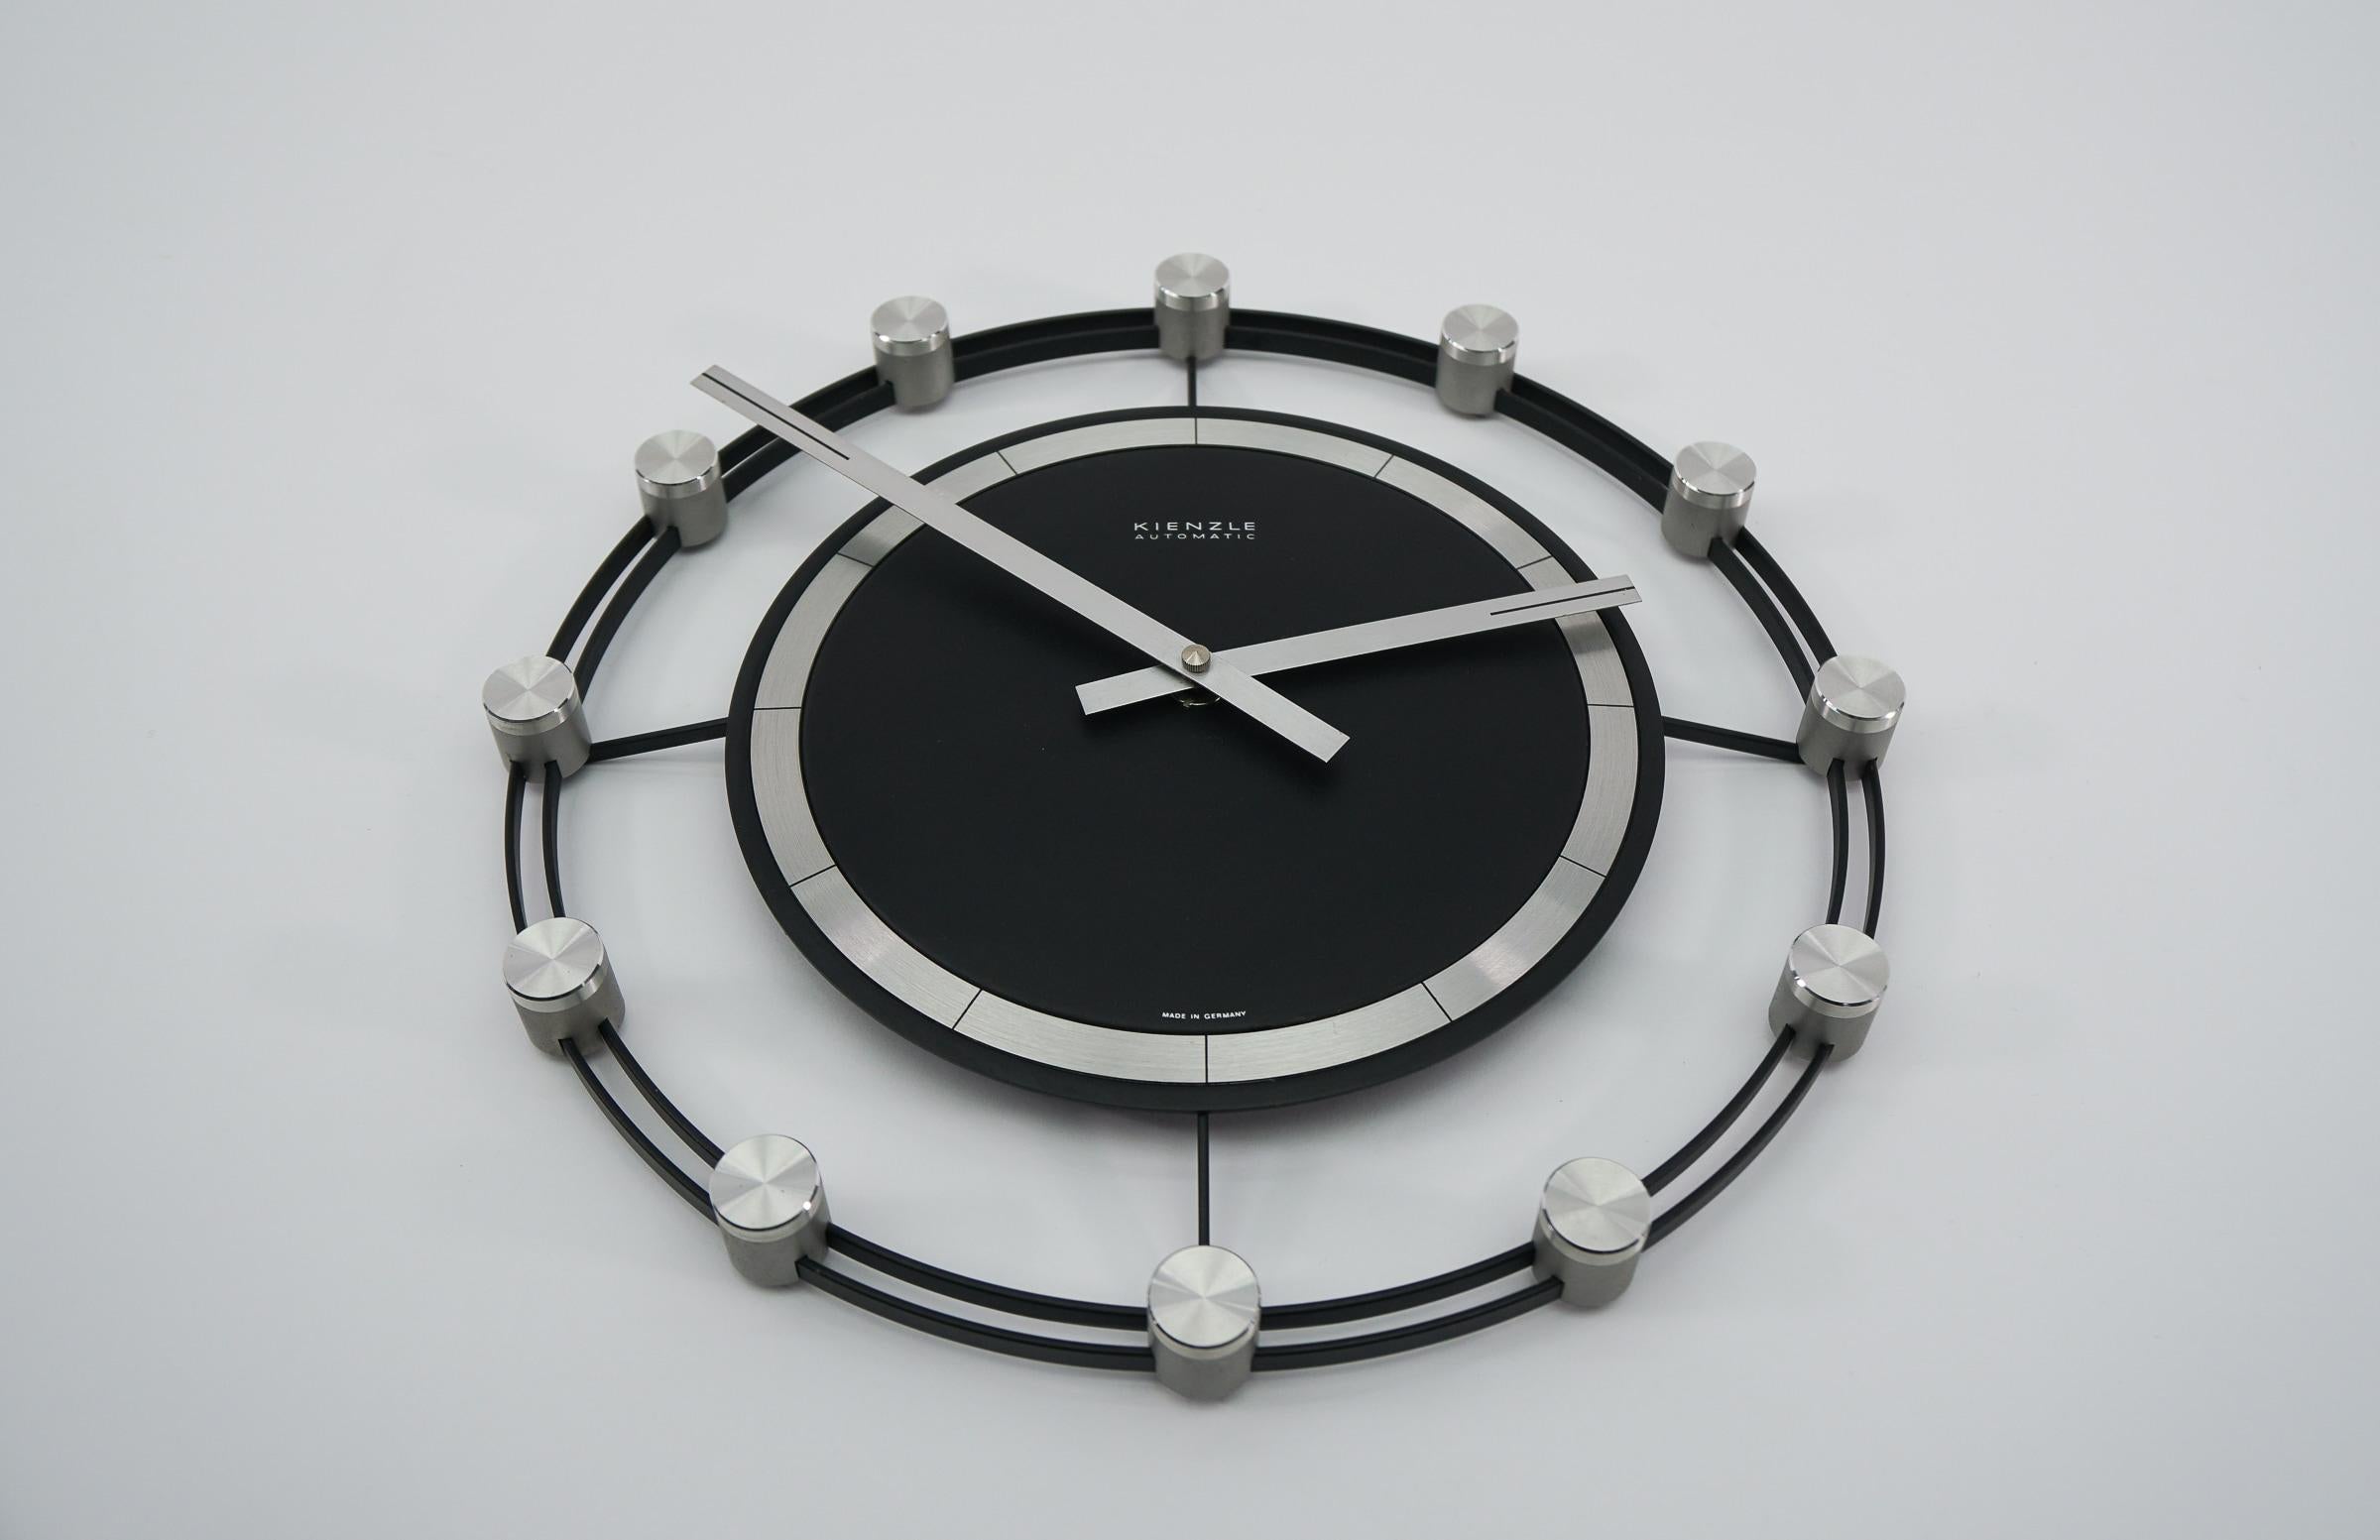 Stunning sunburst wall clock made of aluminium and metal. 

One of the most beautiful models I have seen to date.

An eye catcher par excellence.

Made in Germany.

Electric, battery operated clock.